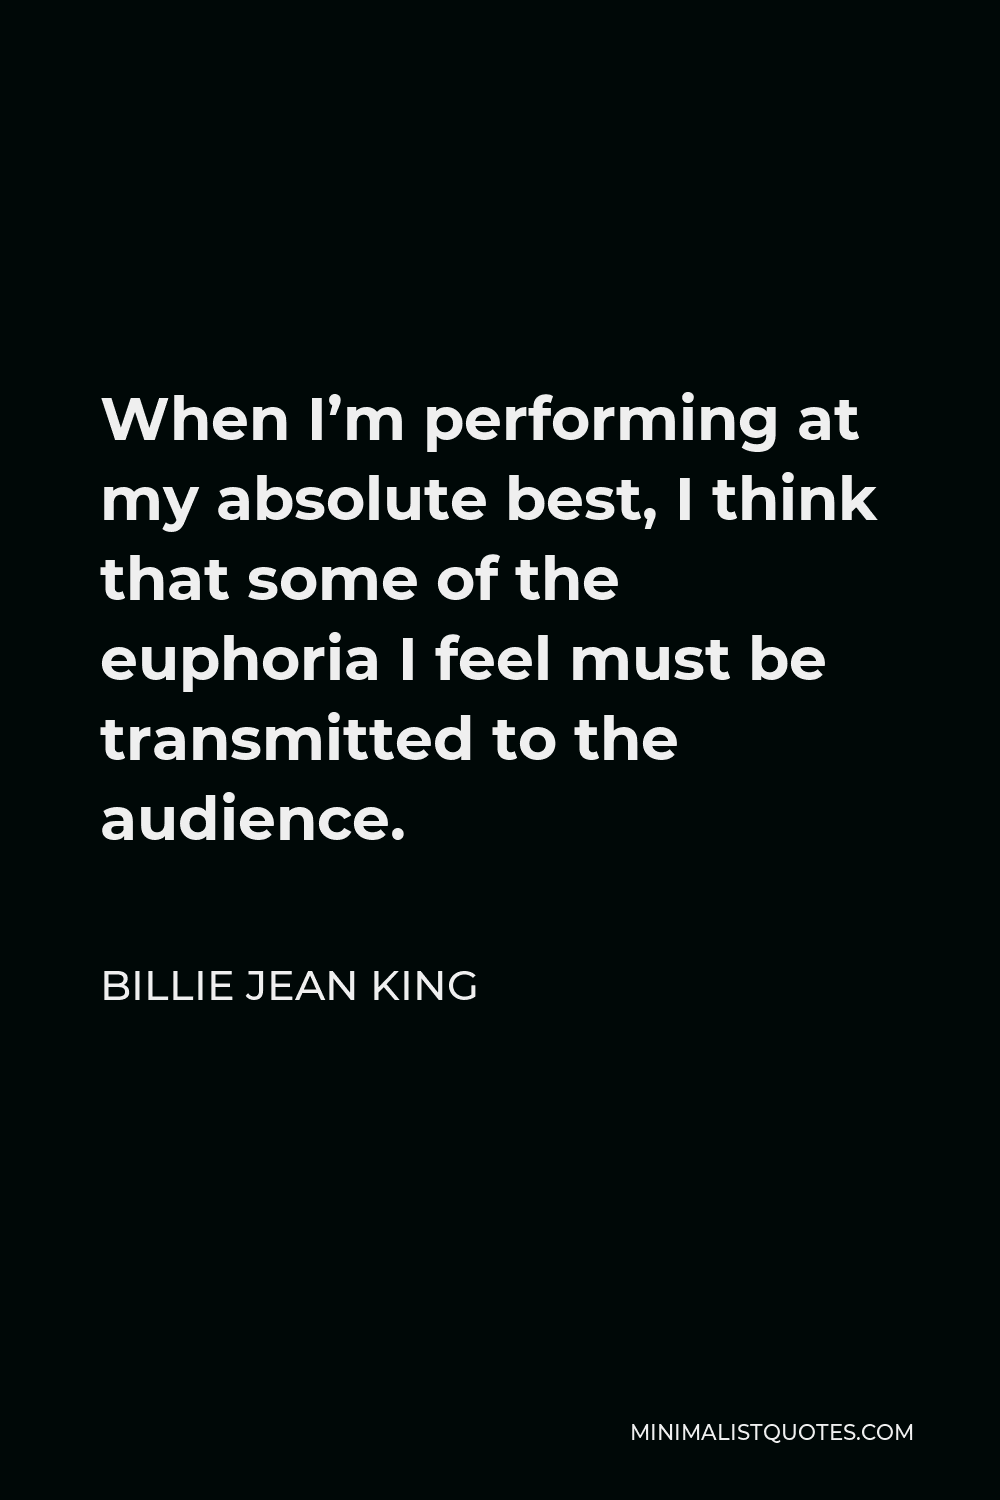 Billie Jean King Quote - When I’m performing at my absolute best, I think that some of the euphoria I feel must be transmitted to the audience.